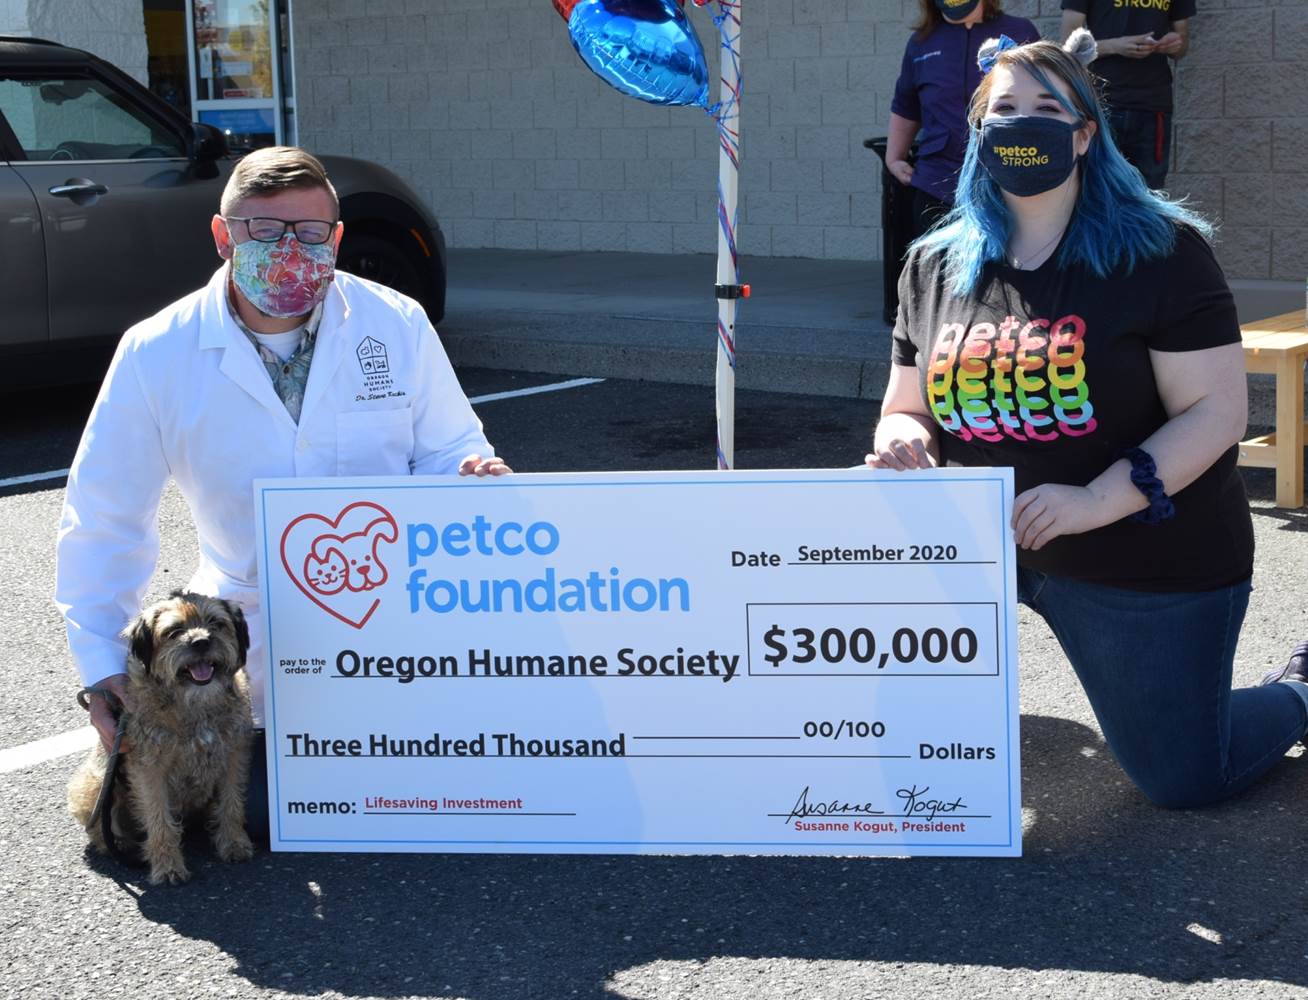 OHS receives $300,000 grant from Petco Foundation